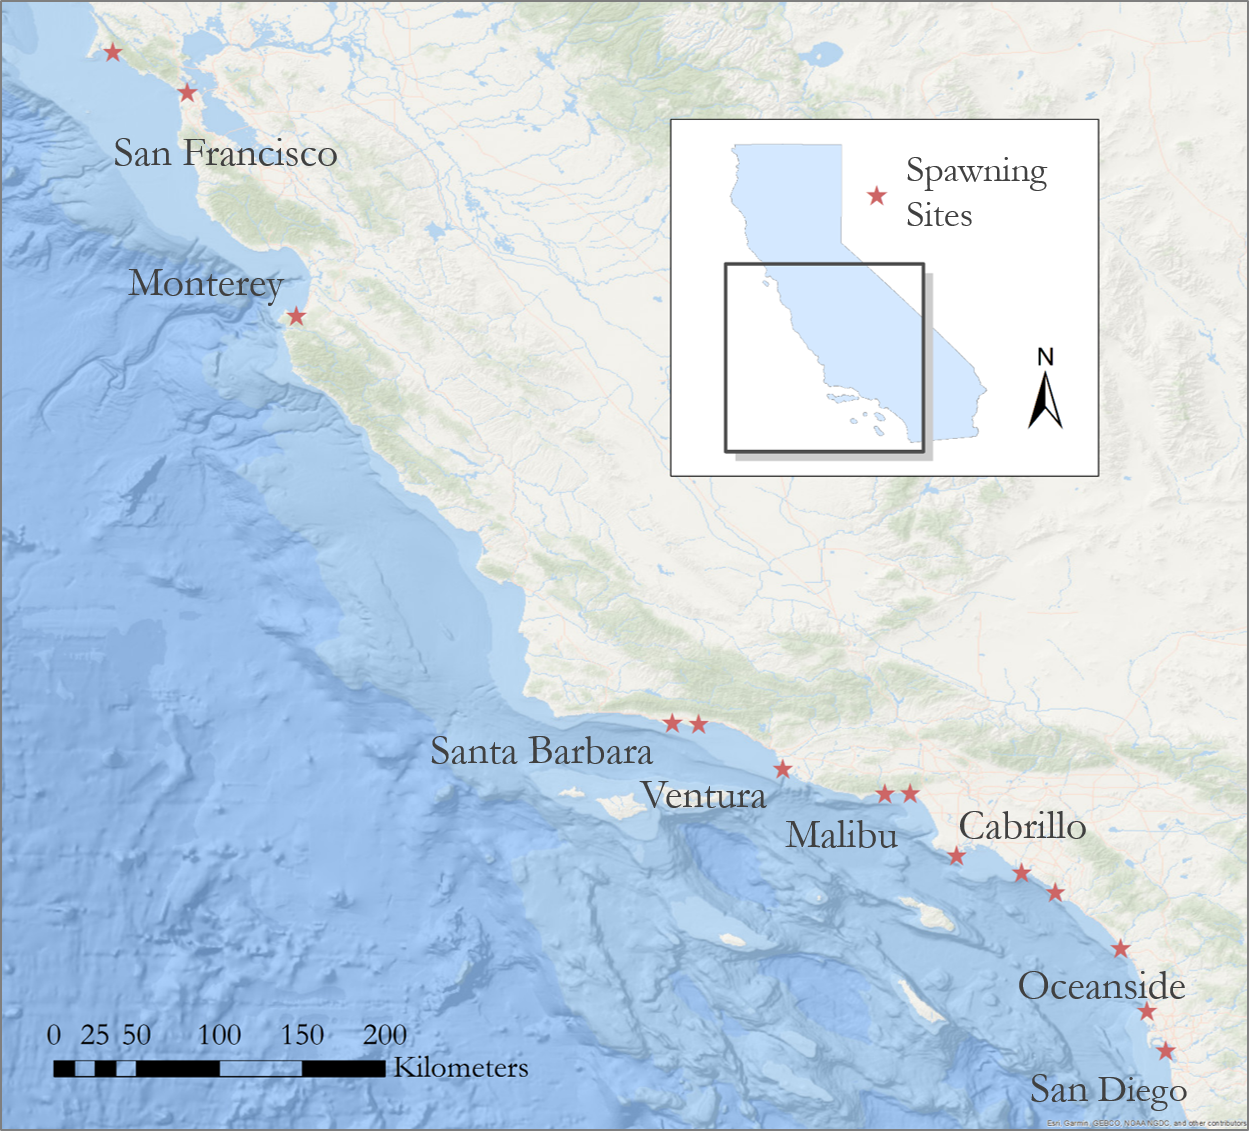 A map created by the team that shows certain spawning sites of grunion, including beaches included in analysis (Northern: San Francisco, Monterey; Central: Santa Barbra, Ventura; Southern: Malibu, Cabrillo, Orange County, Oceanside, San Diego). Image credit: NASA DEVELOP